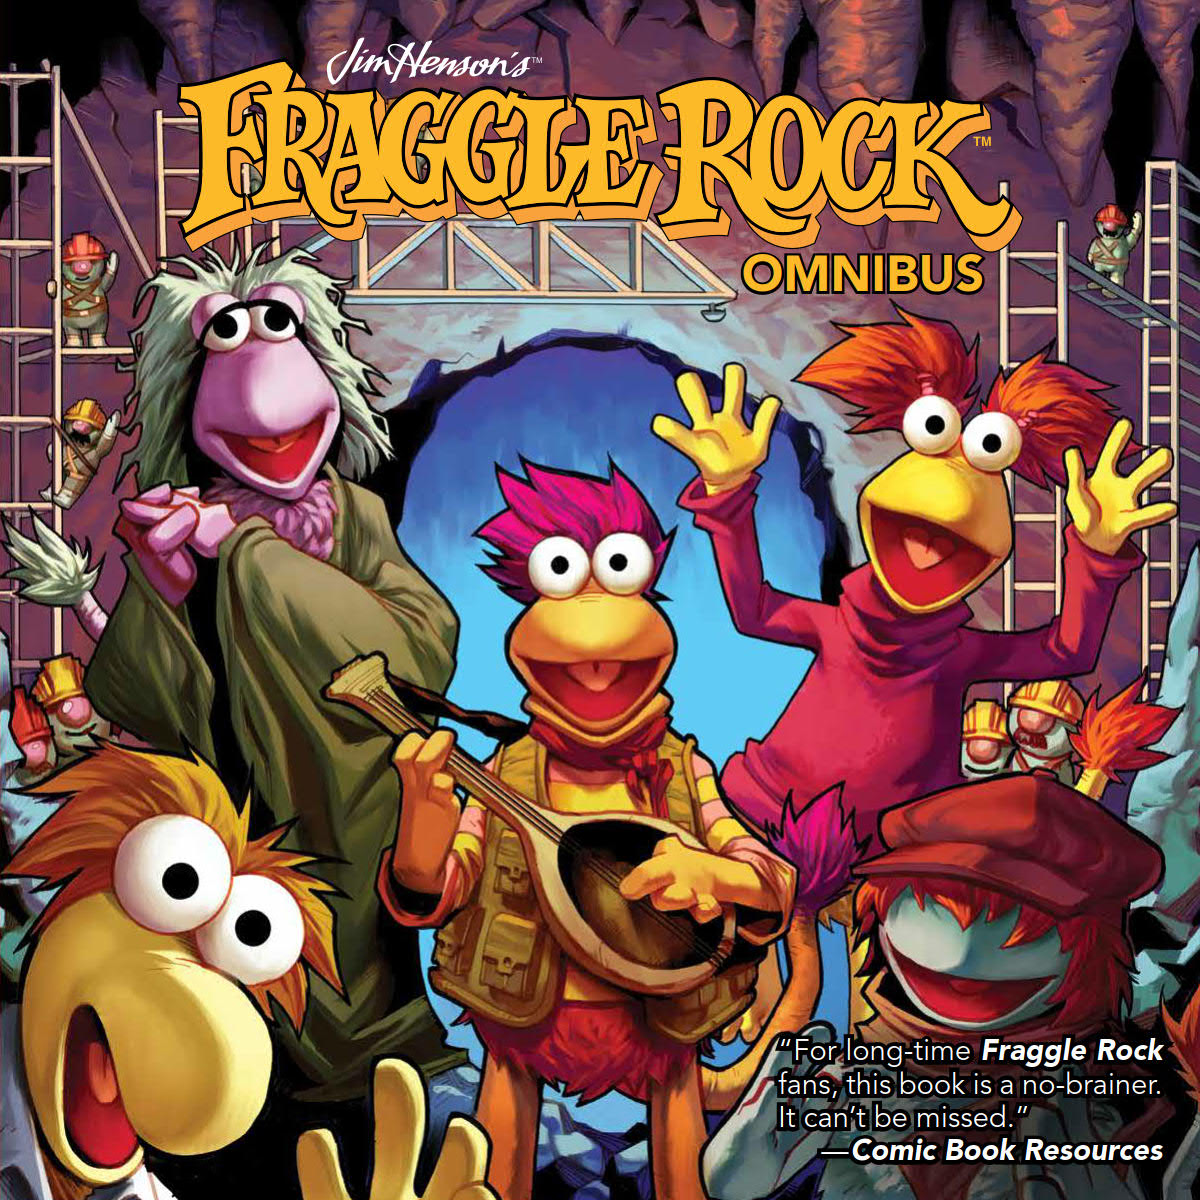 Jim Henson's Fraggle Rock Omnibus review: An essential collection for fans